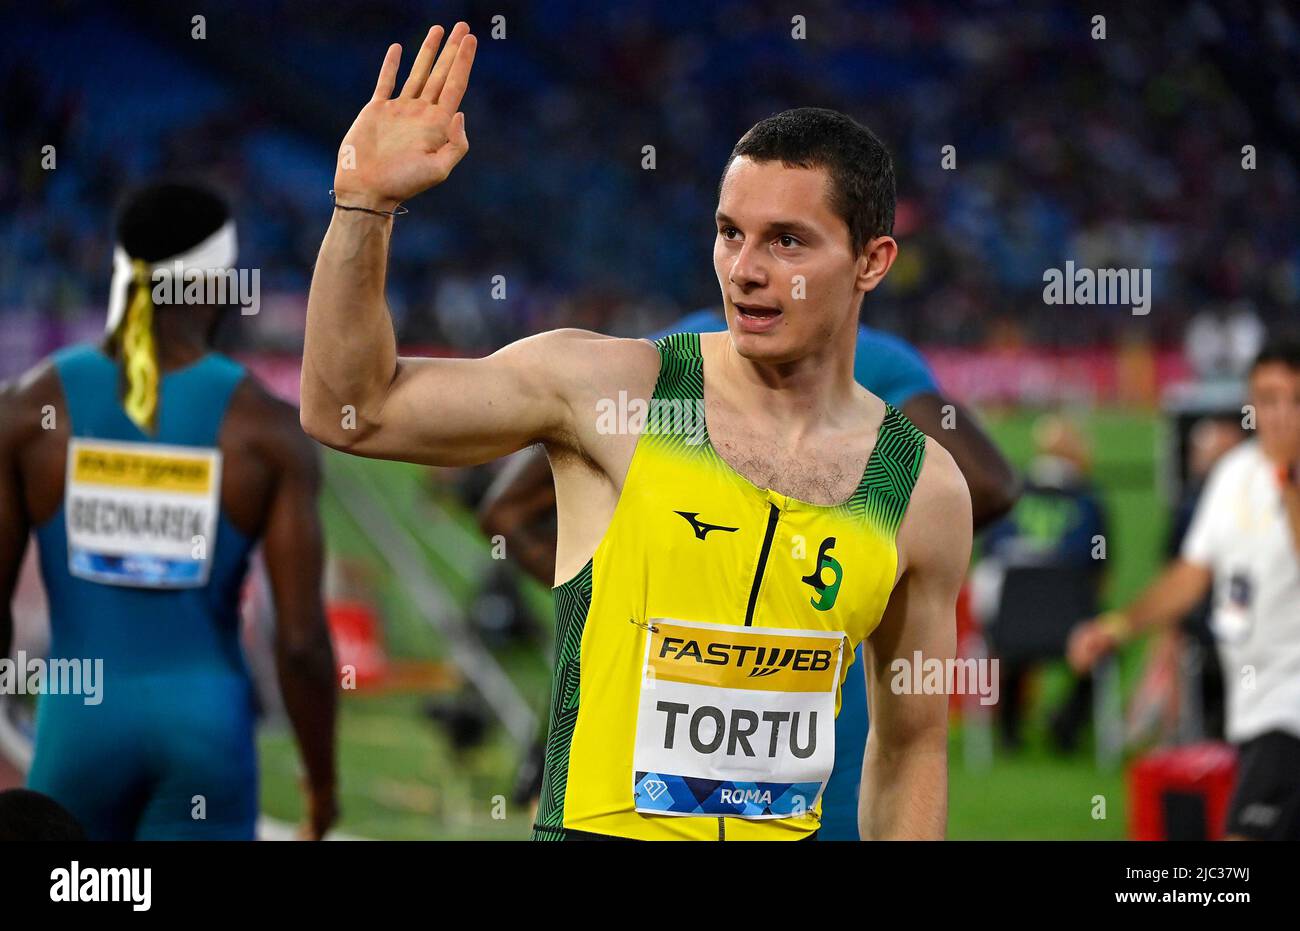 June 9, 2022, Rome: Filippo Tortu of Italy competes in the Men's 100m event  during the Diamond League Golden Gala 2022 at the Olimpico stadium in Rome,  Italy, 9 June 2022. ANSA/RICCARDO